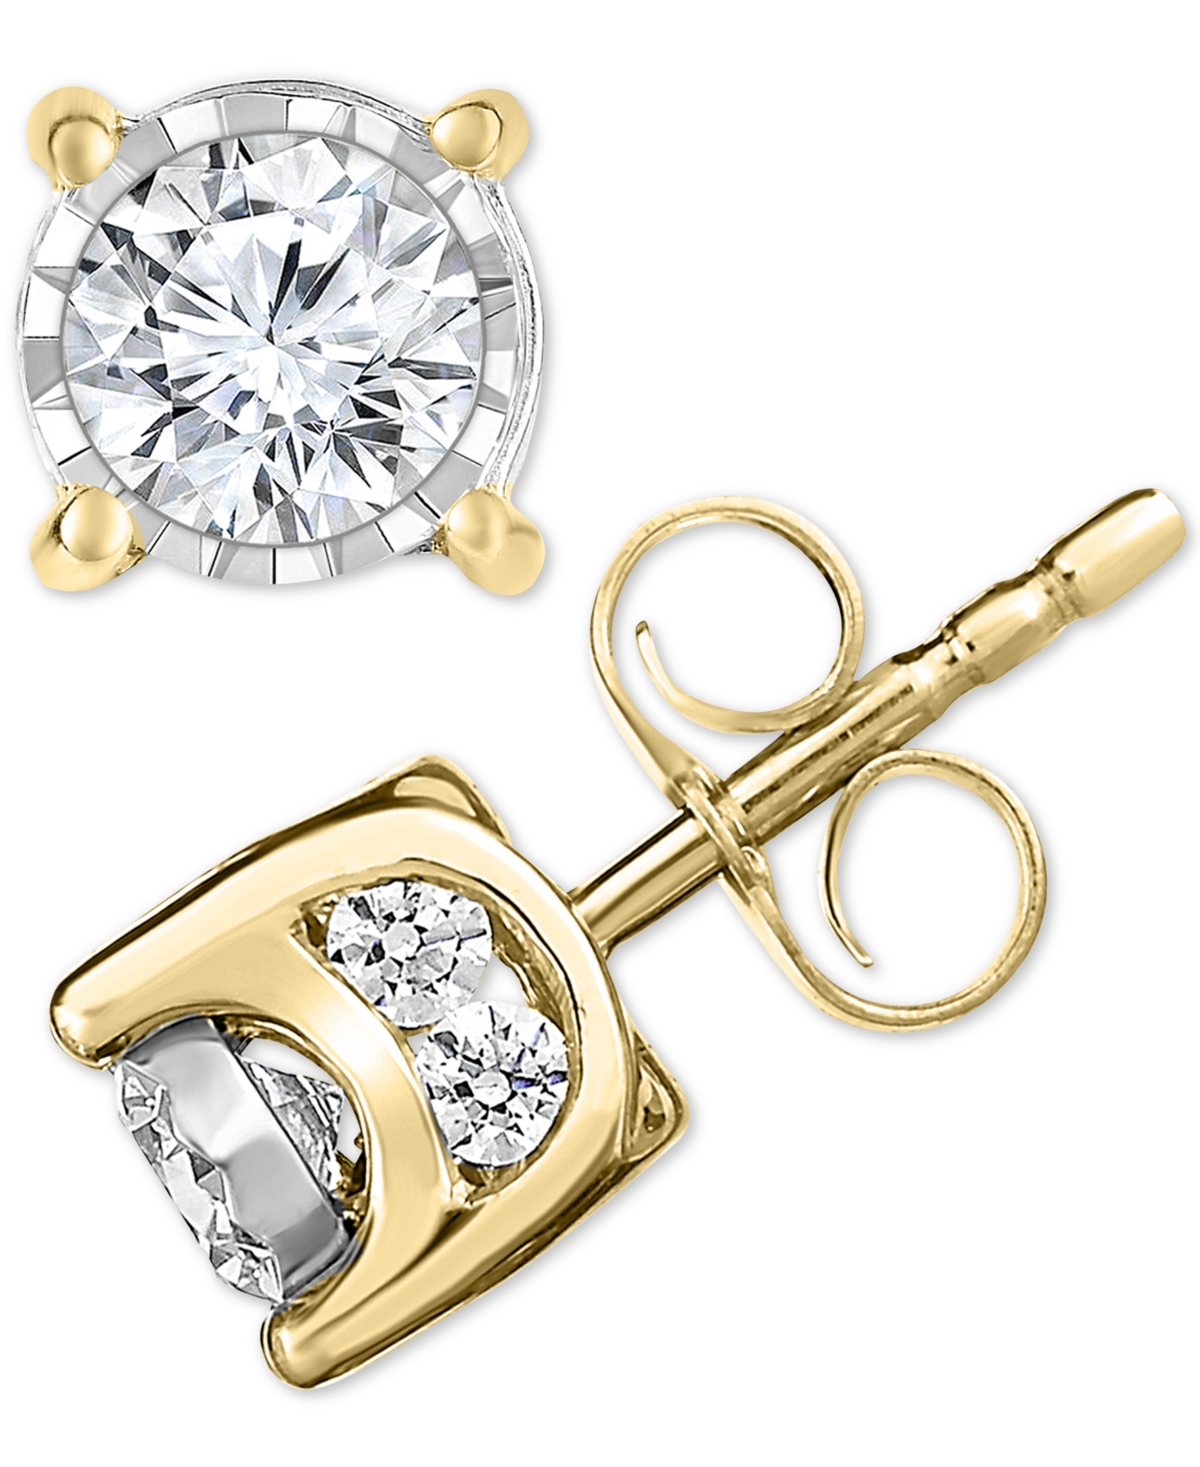 Diamond Stud Earrings (3/4 ct. t.w.) in 14k White Gold, Rose Gold or Gold - Rose Gold